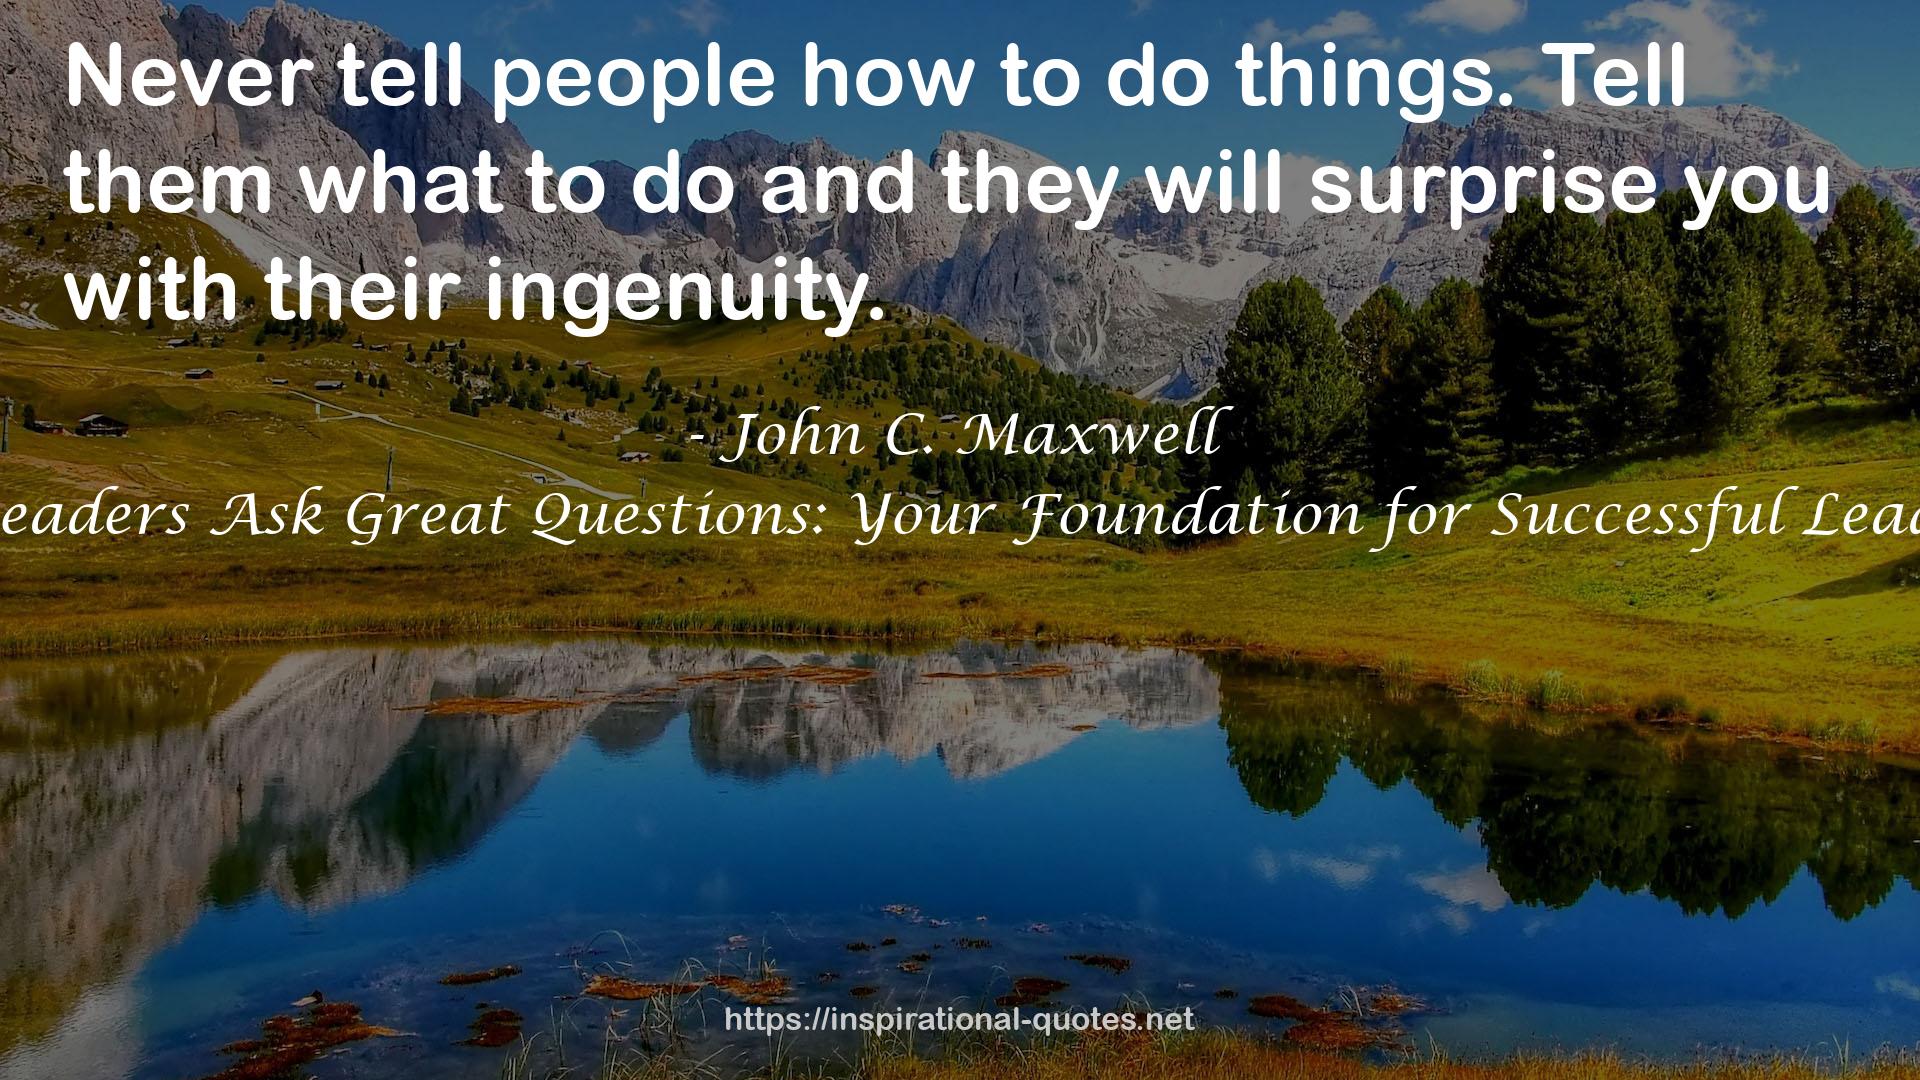 Good Leaders Ask Great Questions: Your Foundation for Successful Leadership QUOTES